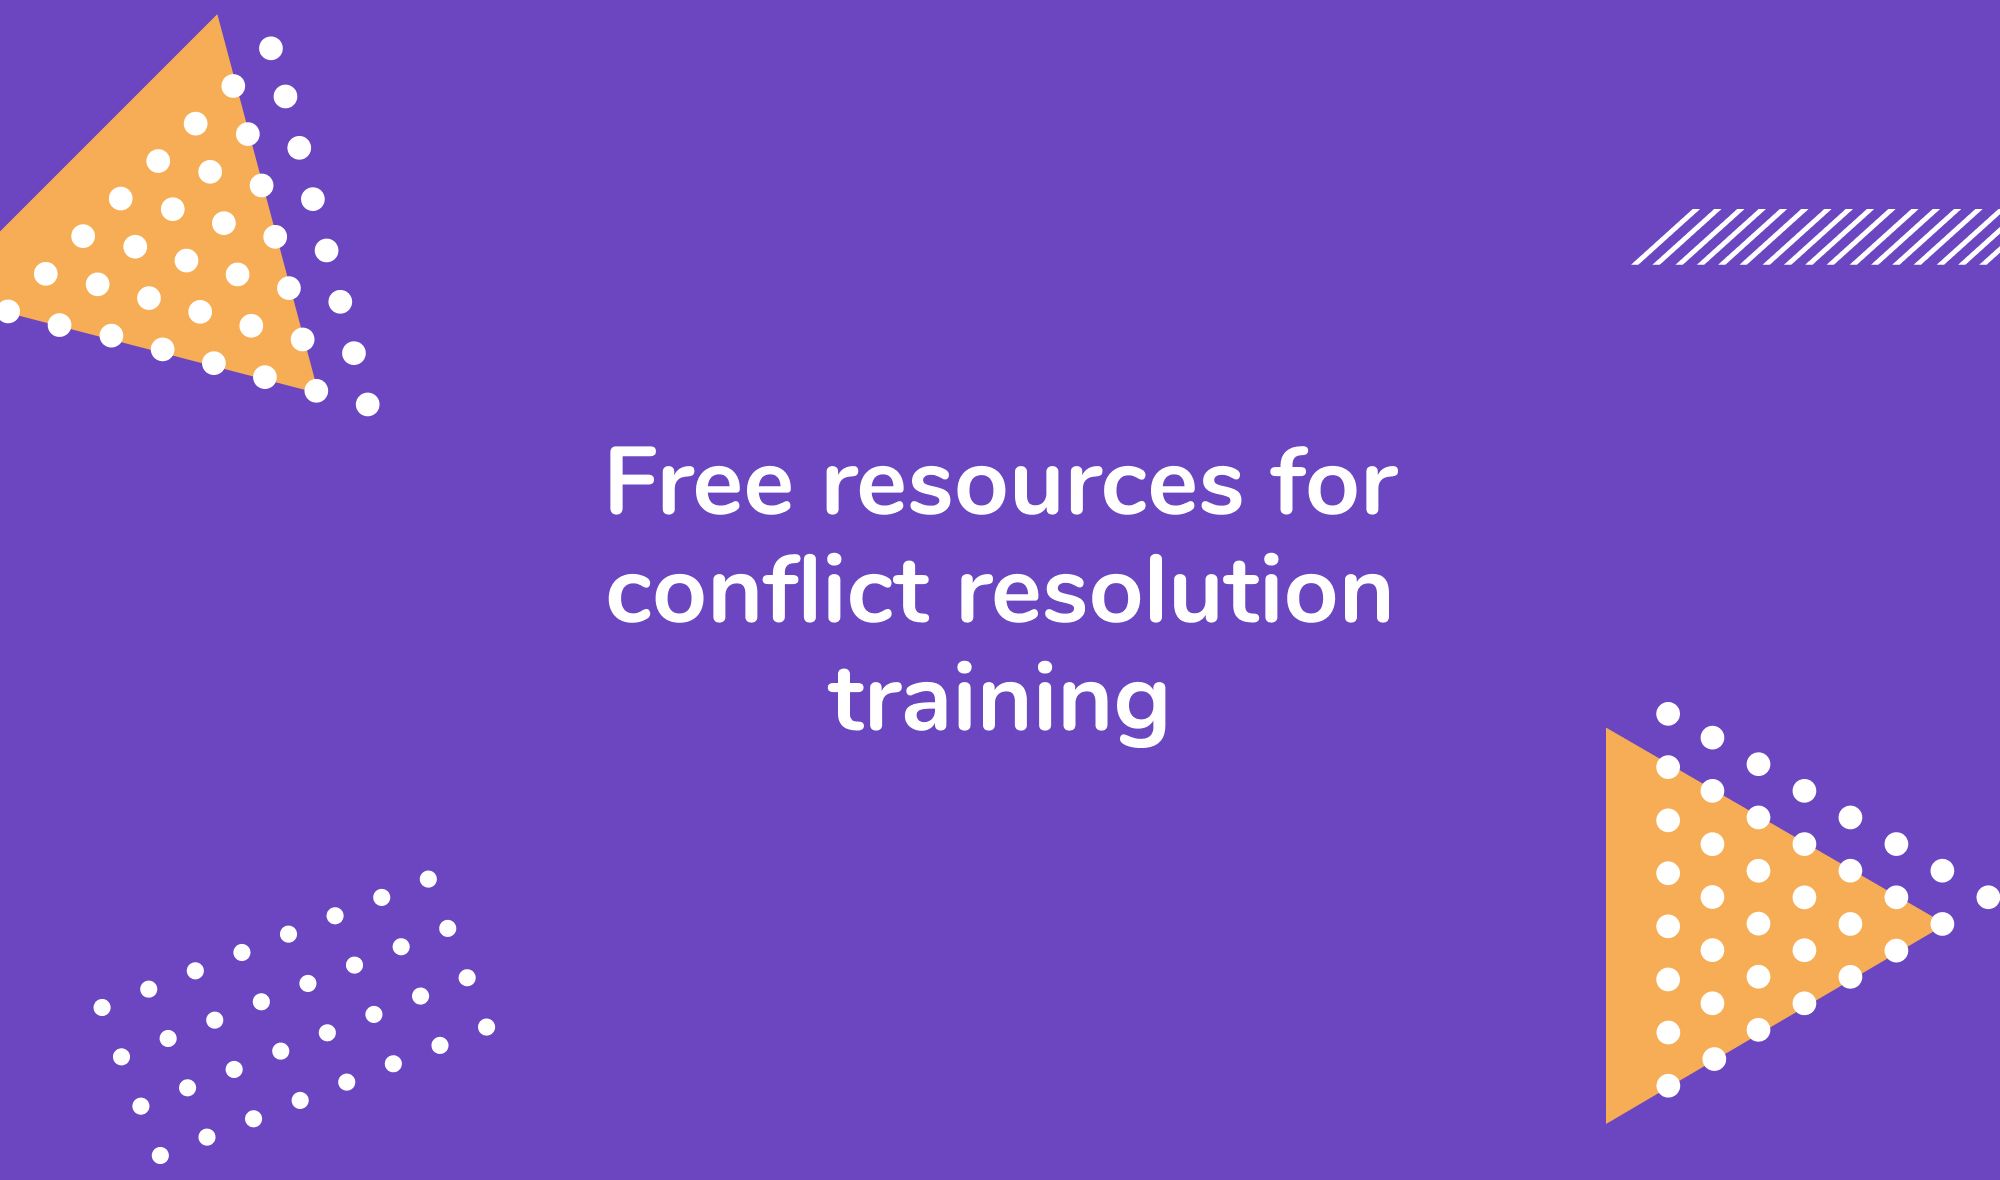 Free resources for conflict resolution training